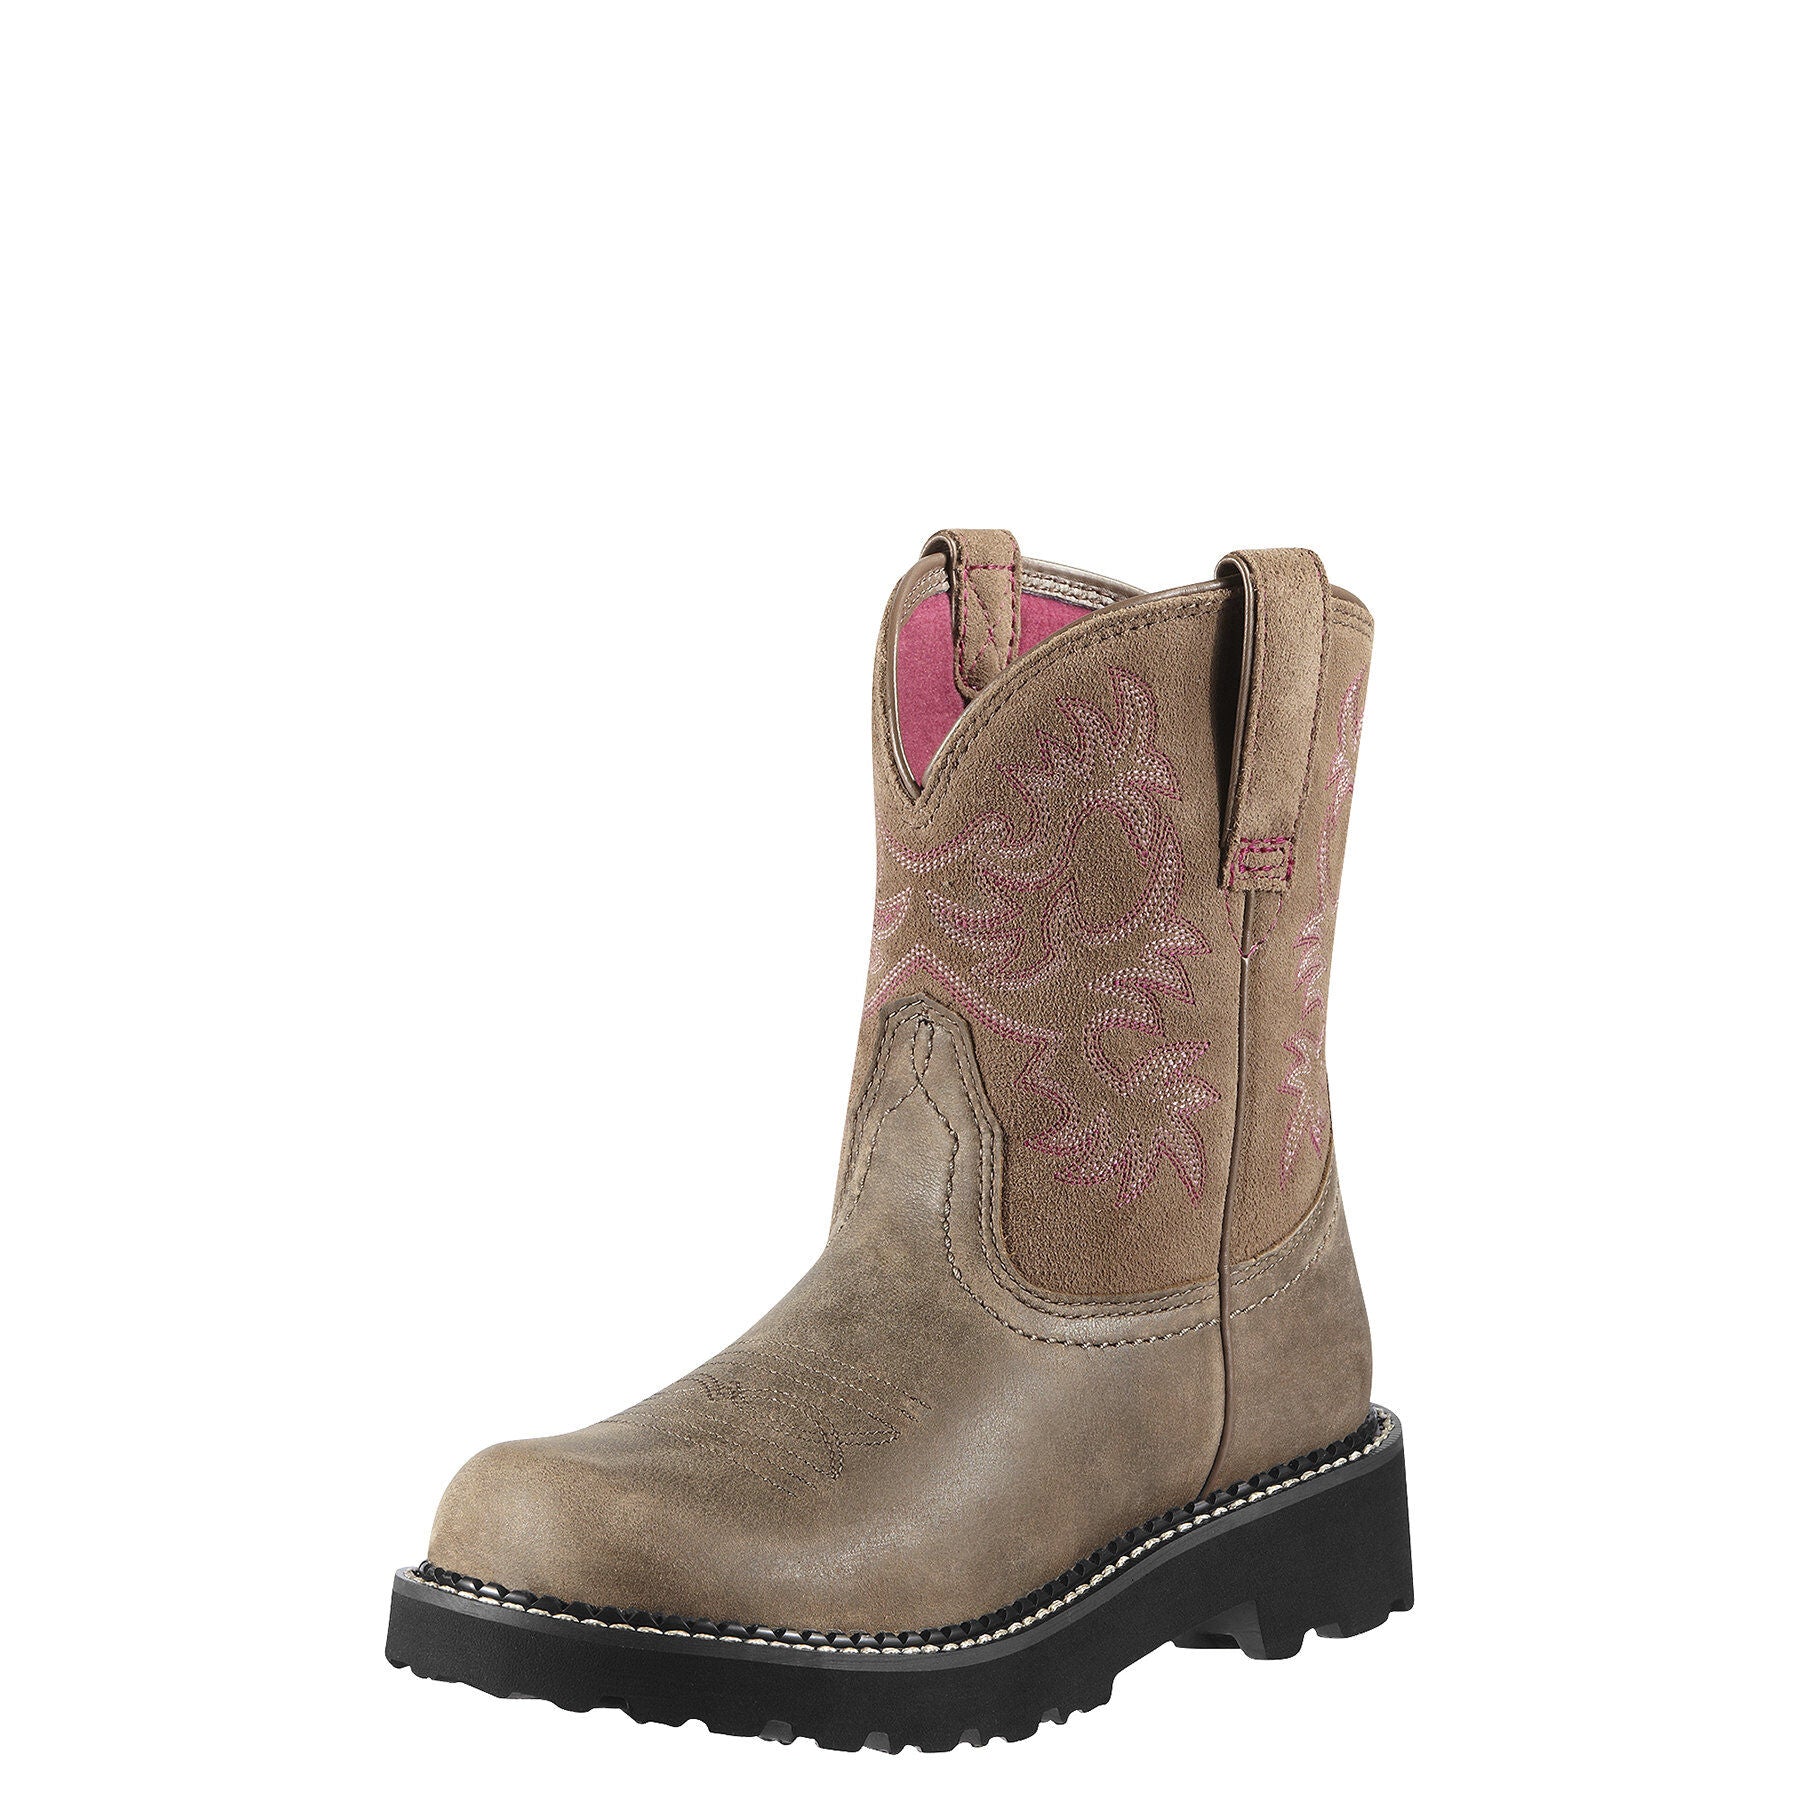 Ariat Women's Fatbaby Boot - Brown Bomber - French's Boots